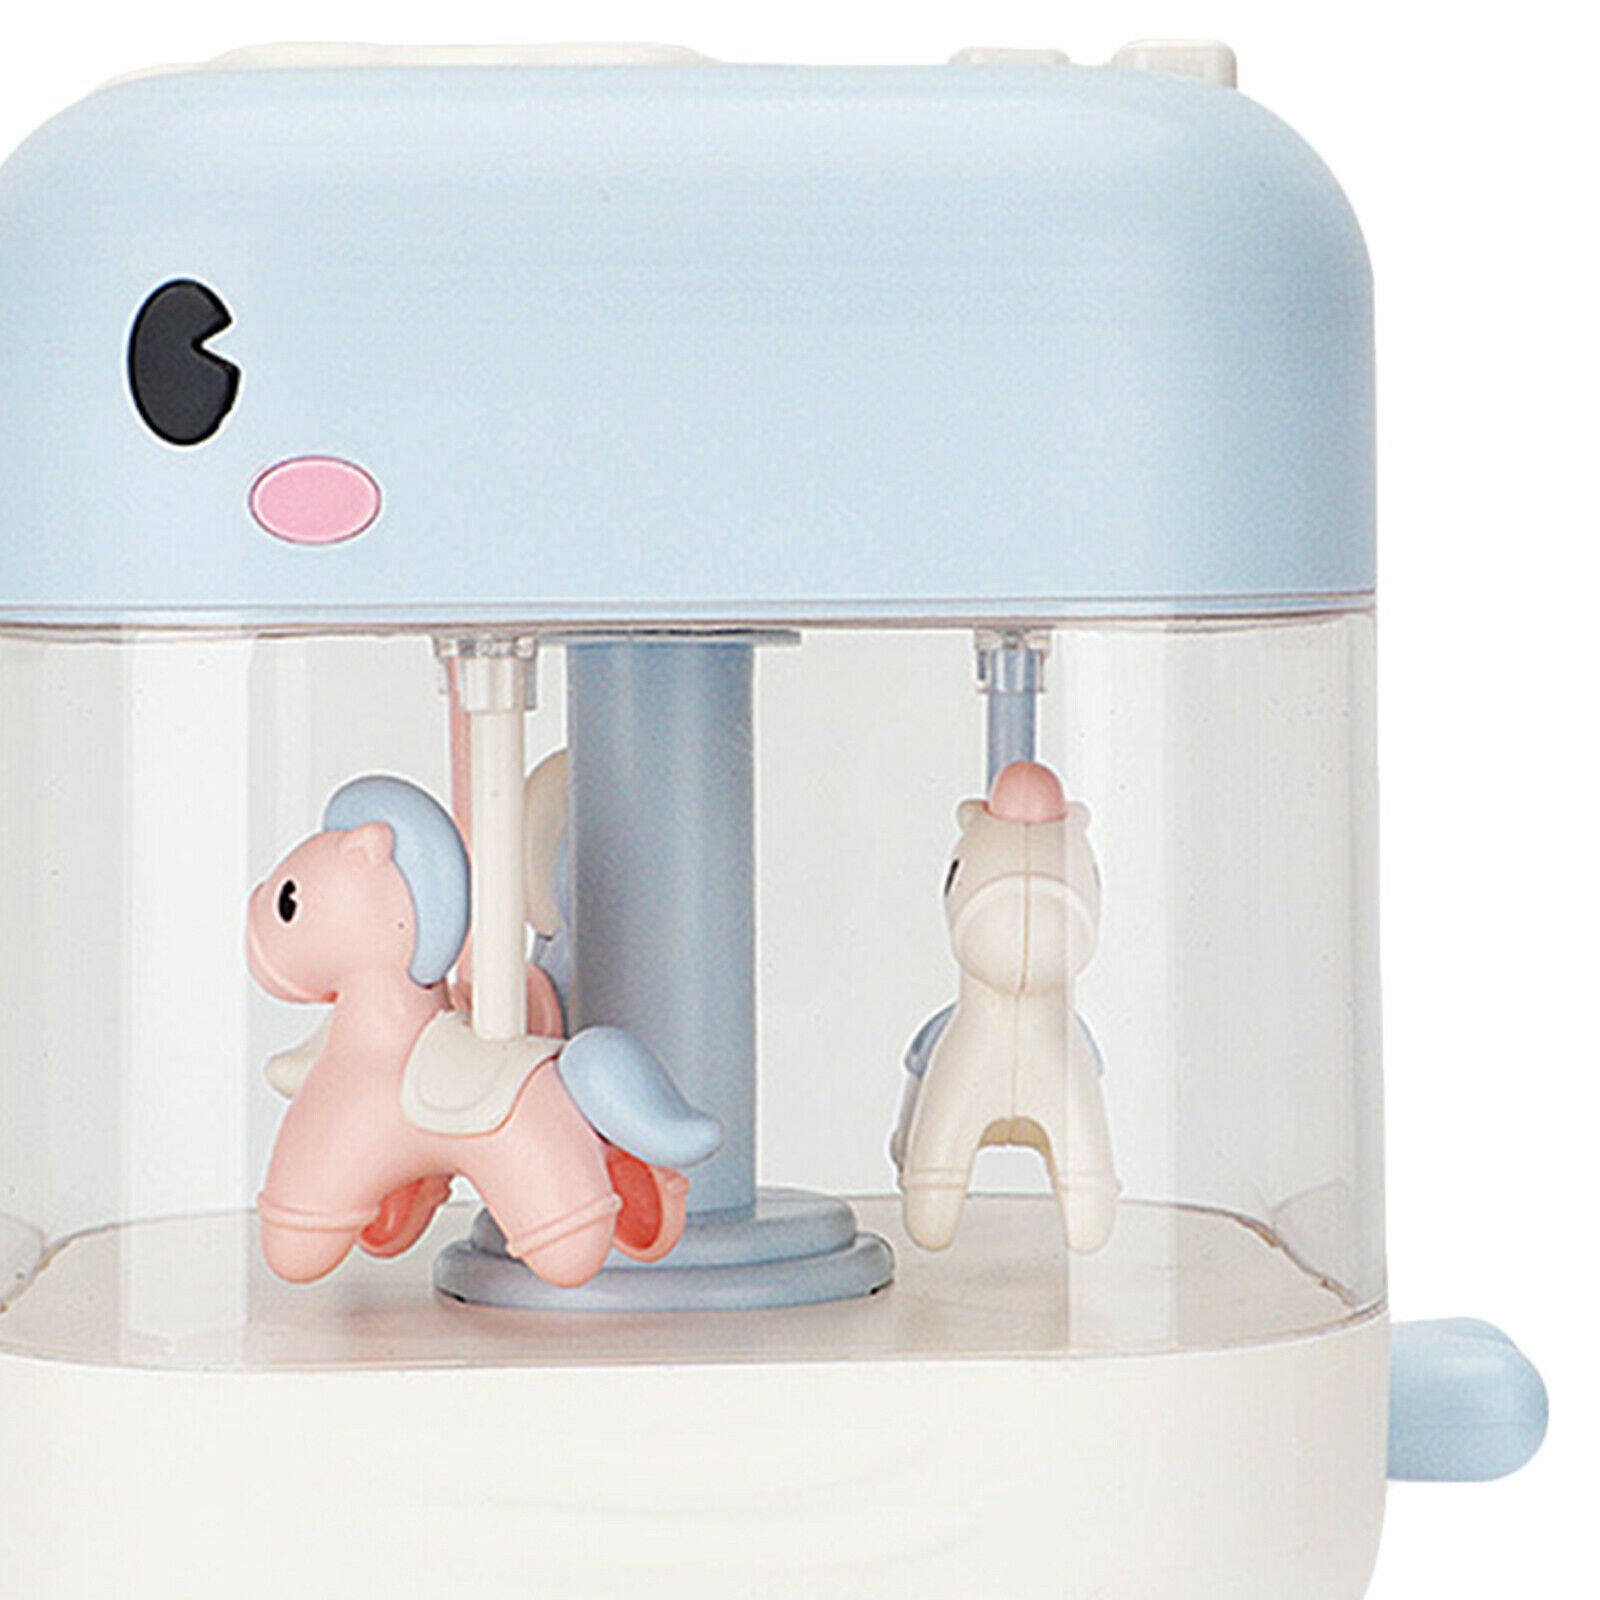 Baby musical toys, toddlers pretend to be with light UP preschool learning and